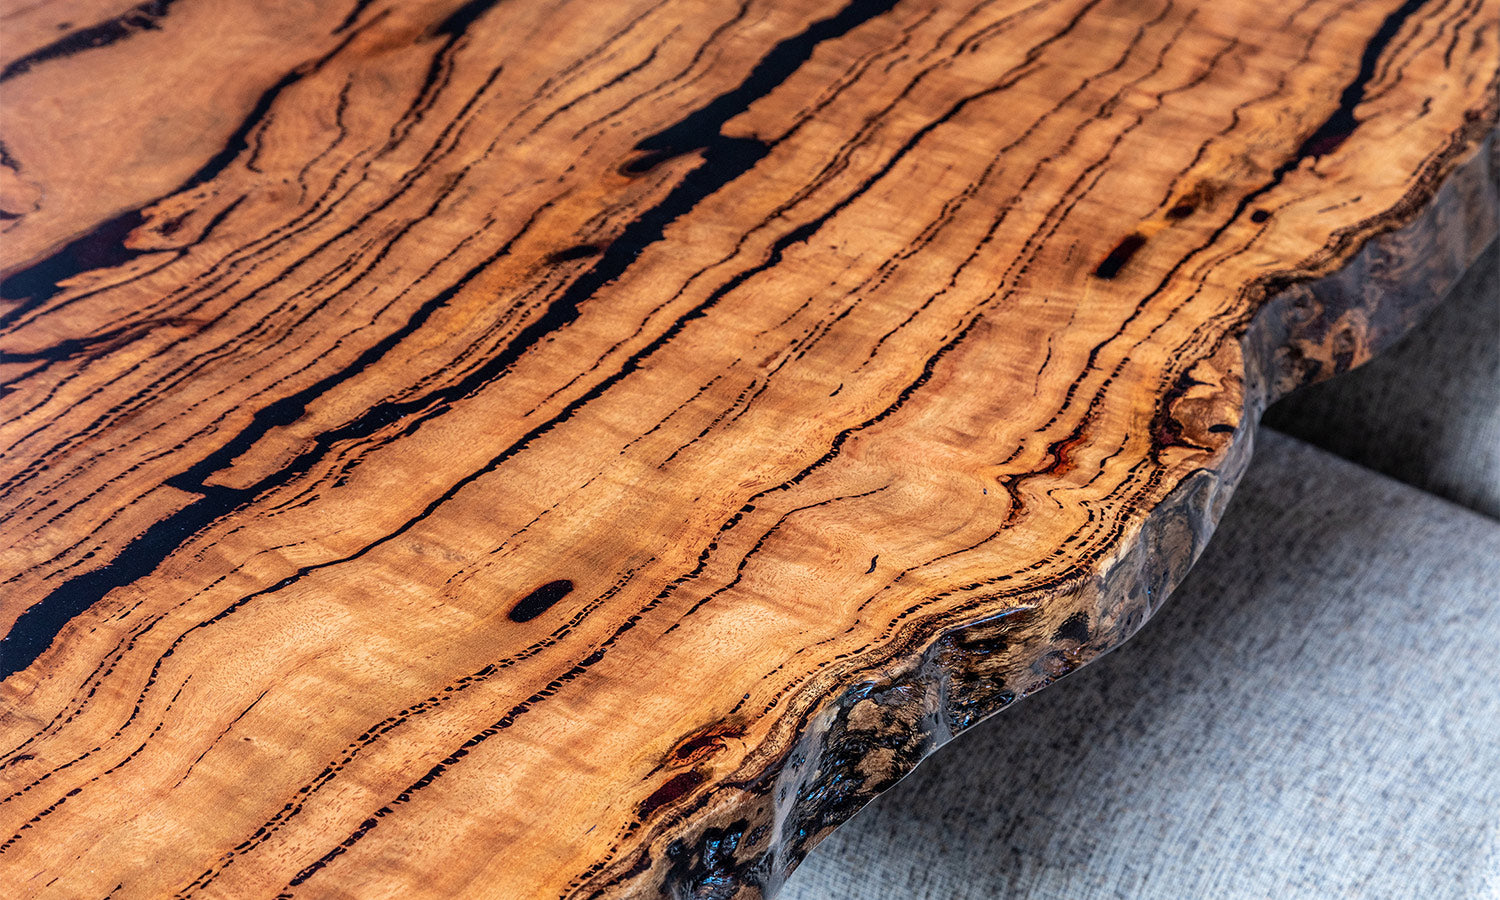 Intwine Solid Marri Timber Slab Dining Table Closeup Detail wood made in Perth, WA